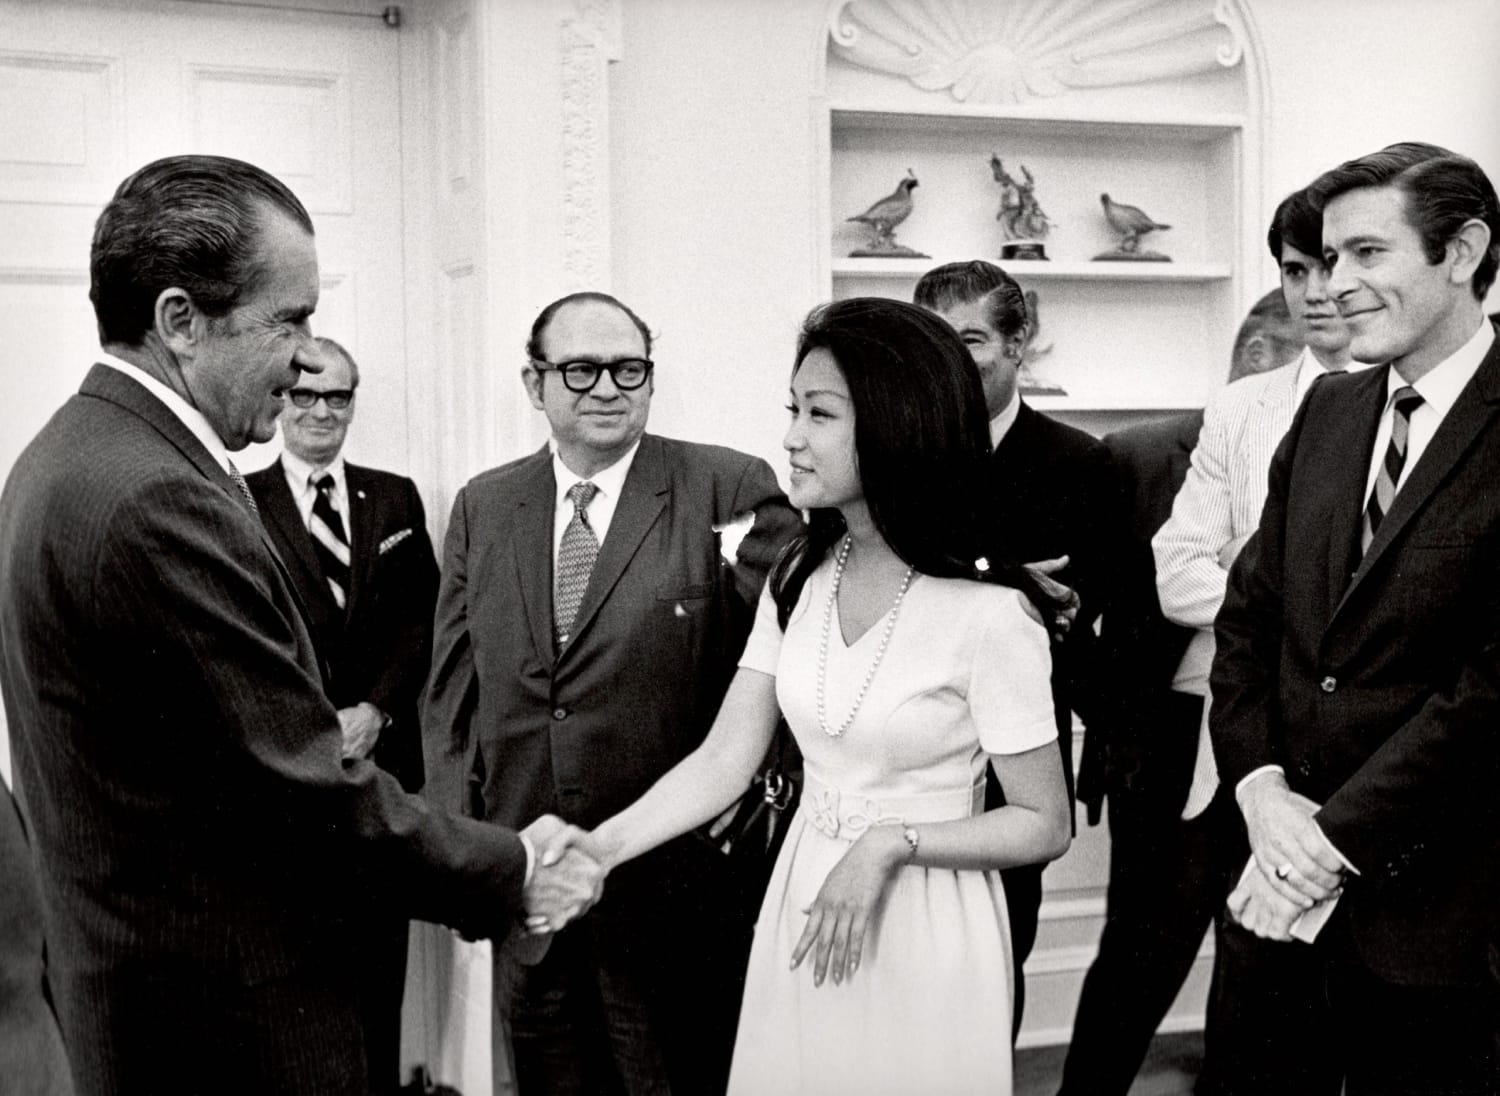 Richard Nixon and Connie Chung in the Oval Office, 1969